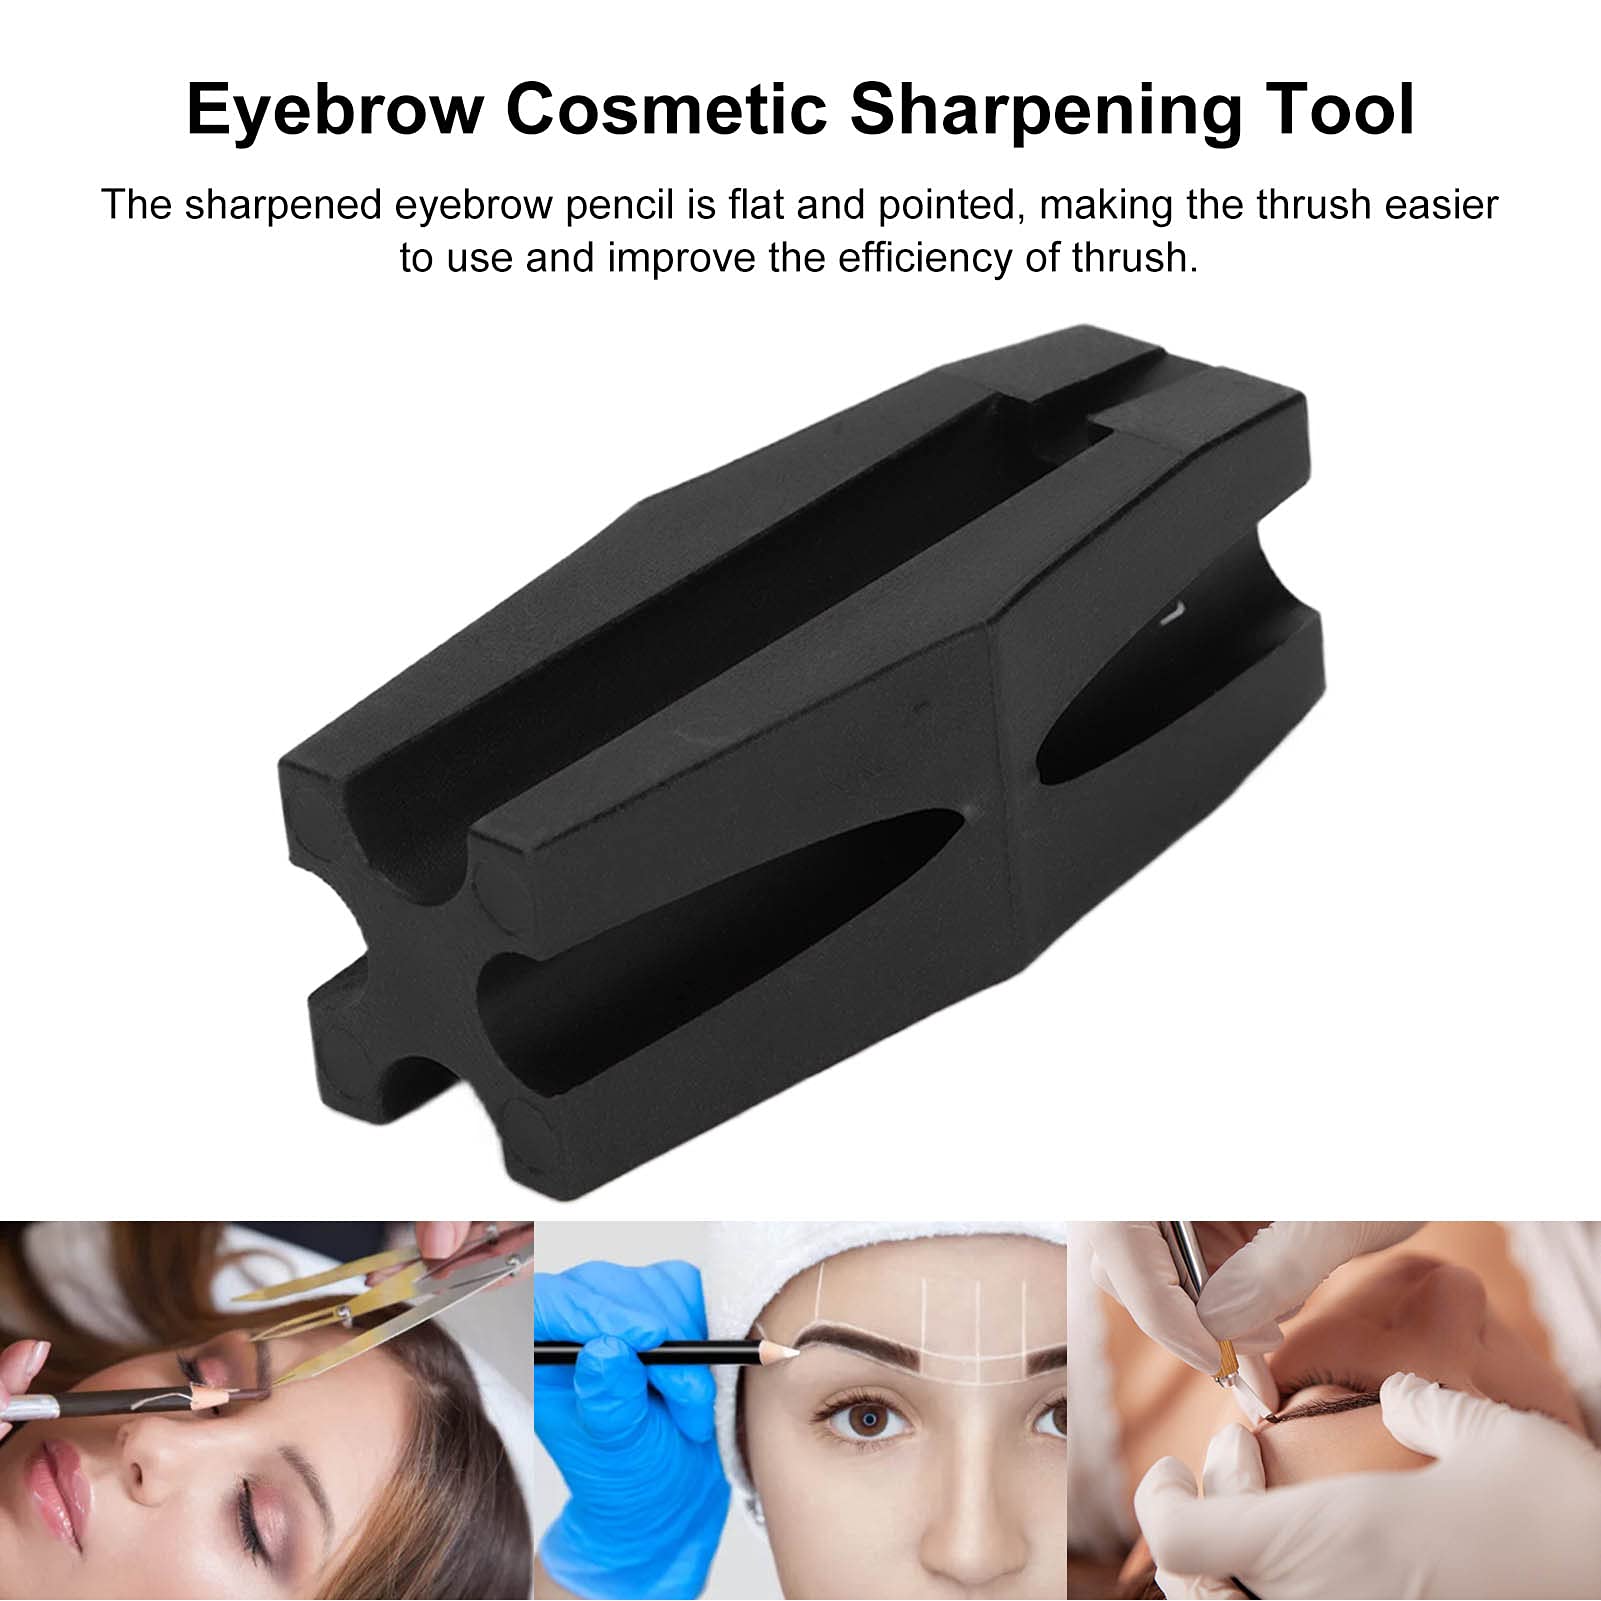 Eyebrow Pencil Sharpener, 4 in 1 Duckbill Shape Eyebrow Pencil Shaper Portable Makeup Sharpener Eyebrow Cosmetic Sharpening Auxiliary Tool Eye Makeup Shaping for Beginners or Professional(Black)